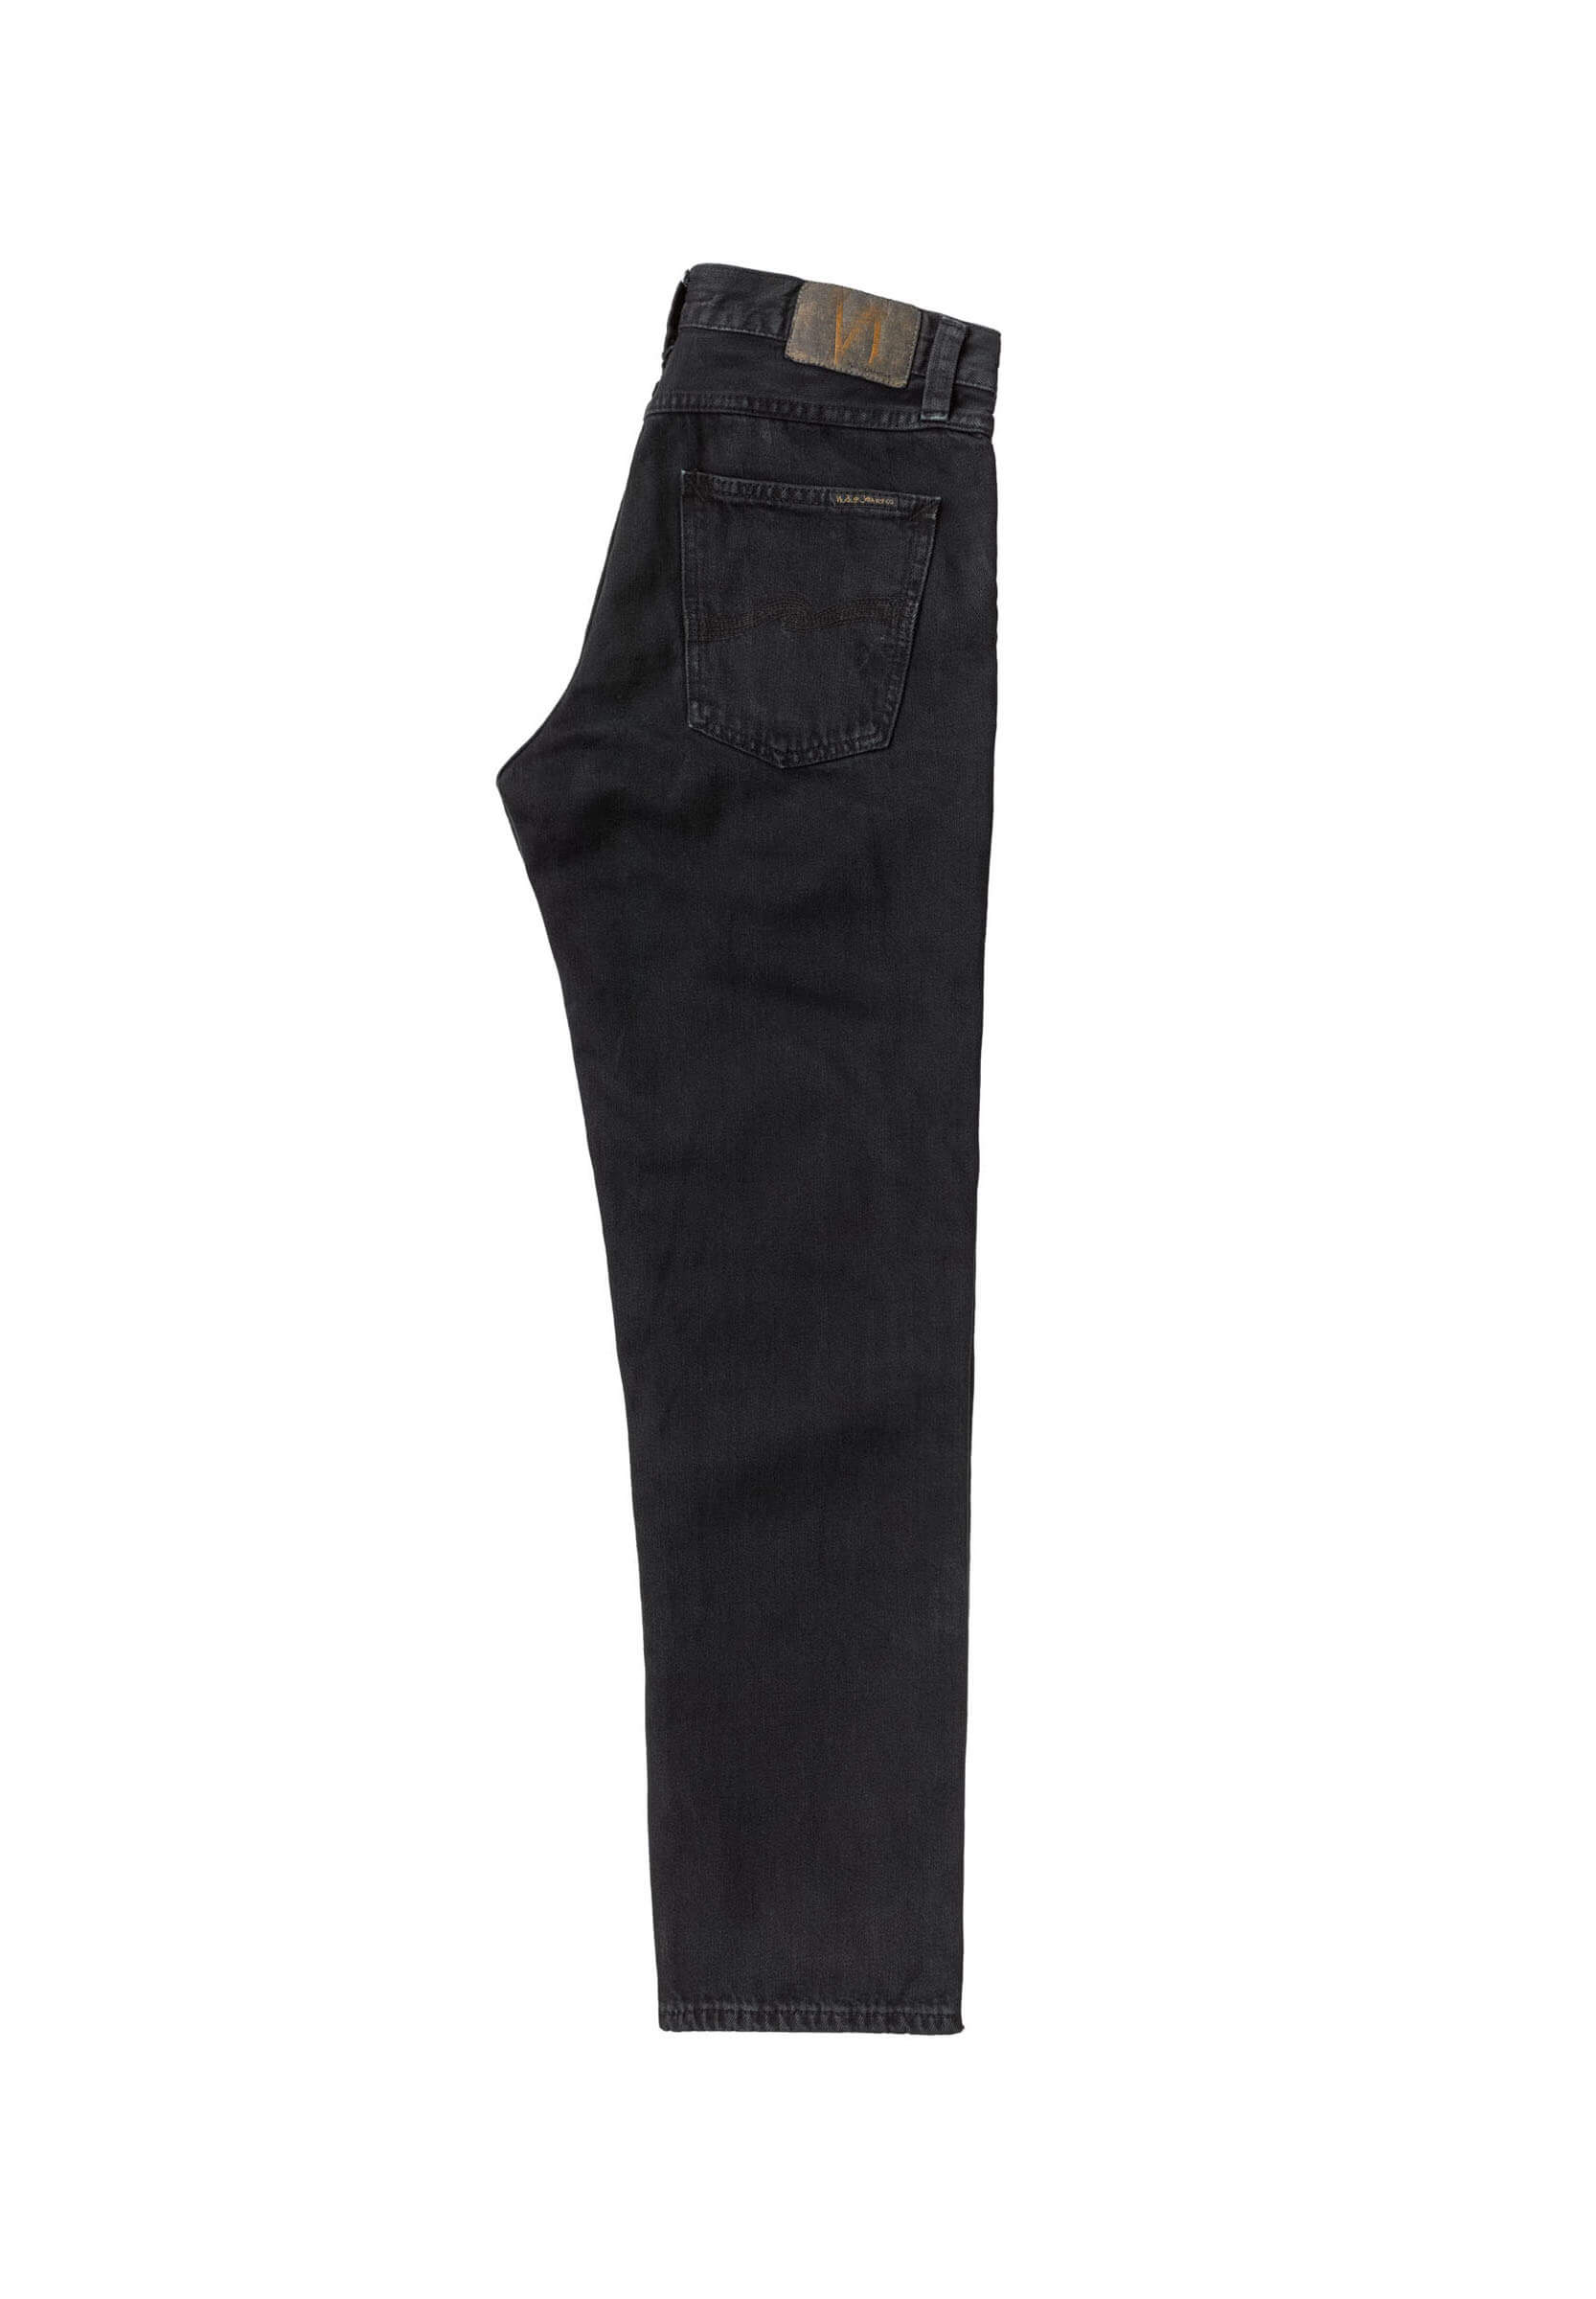 NUDIE JEANS Jeans Gritty Jackson black forest 33/32